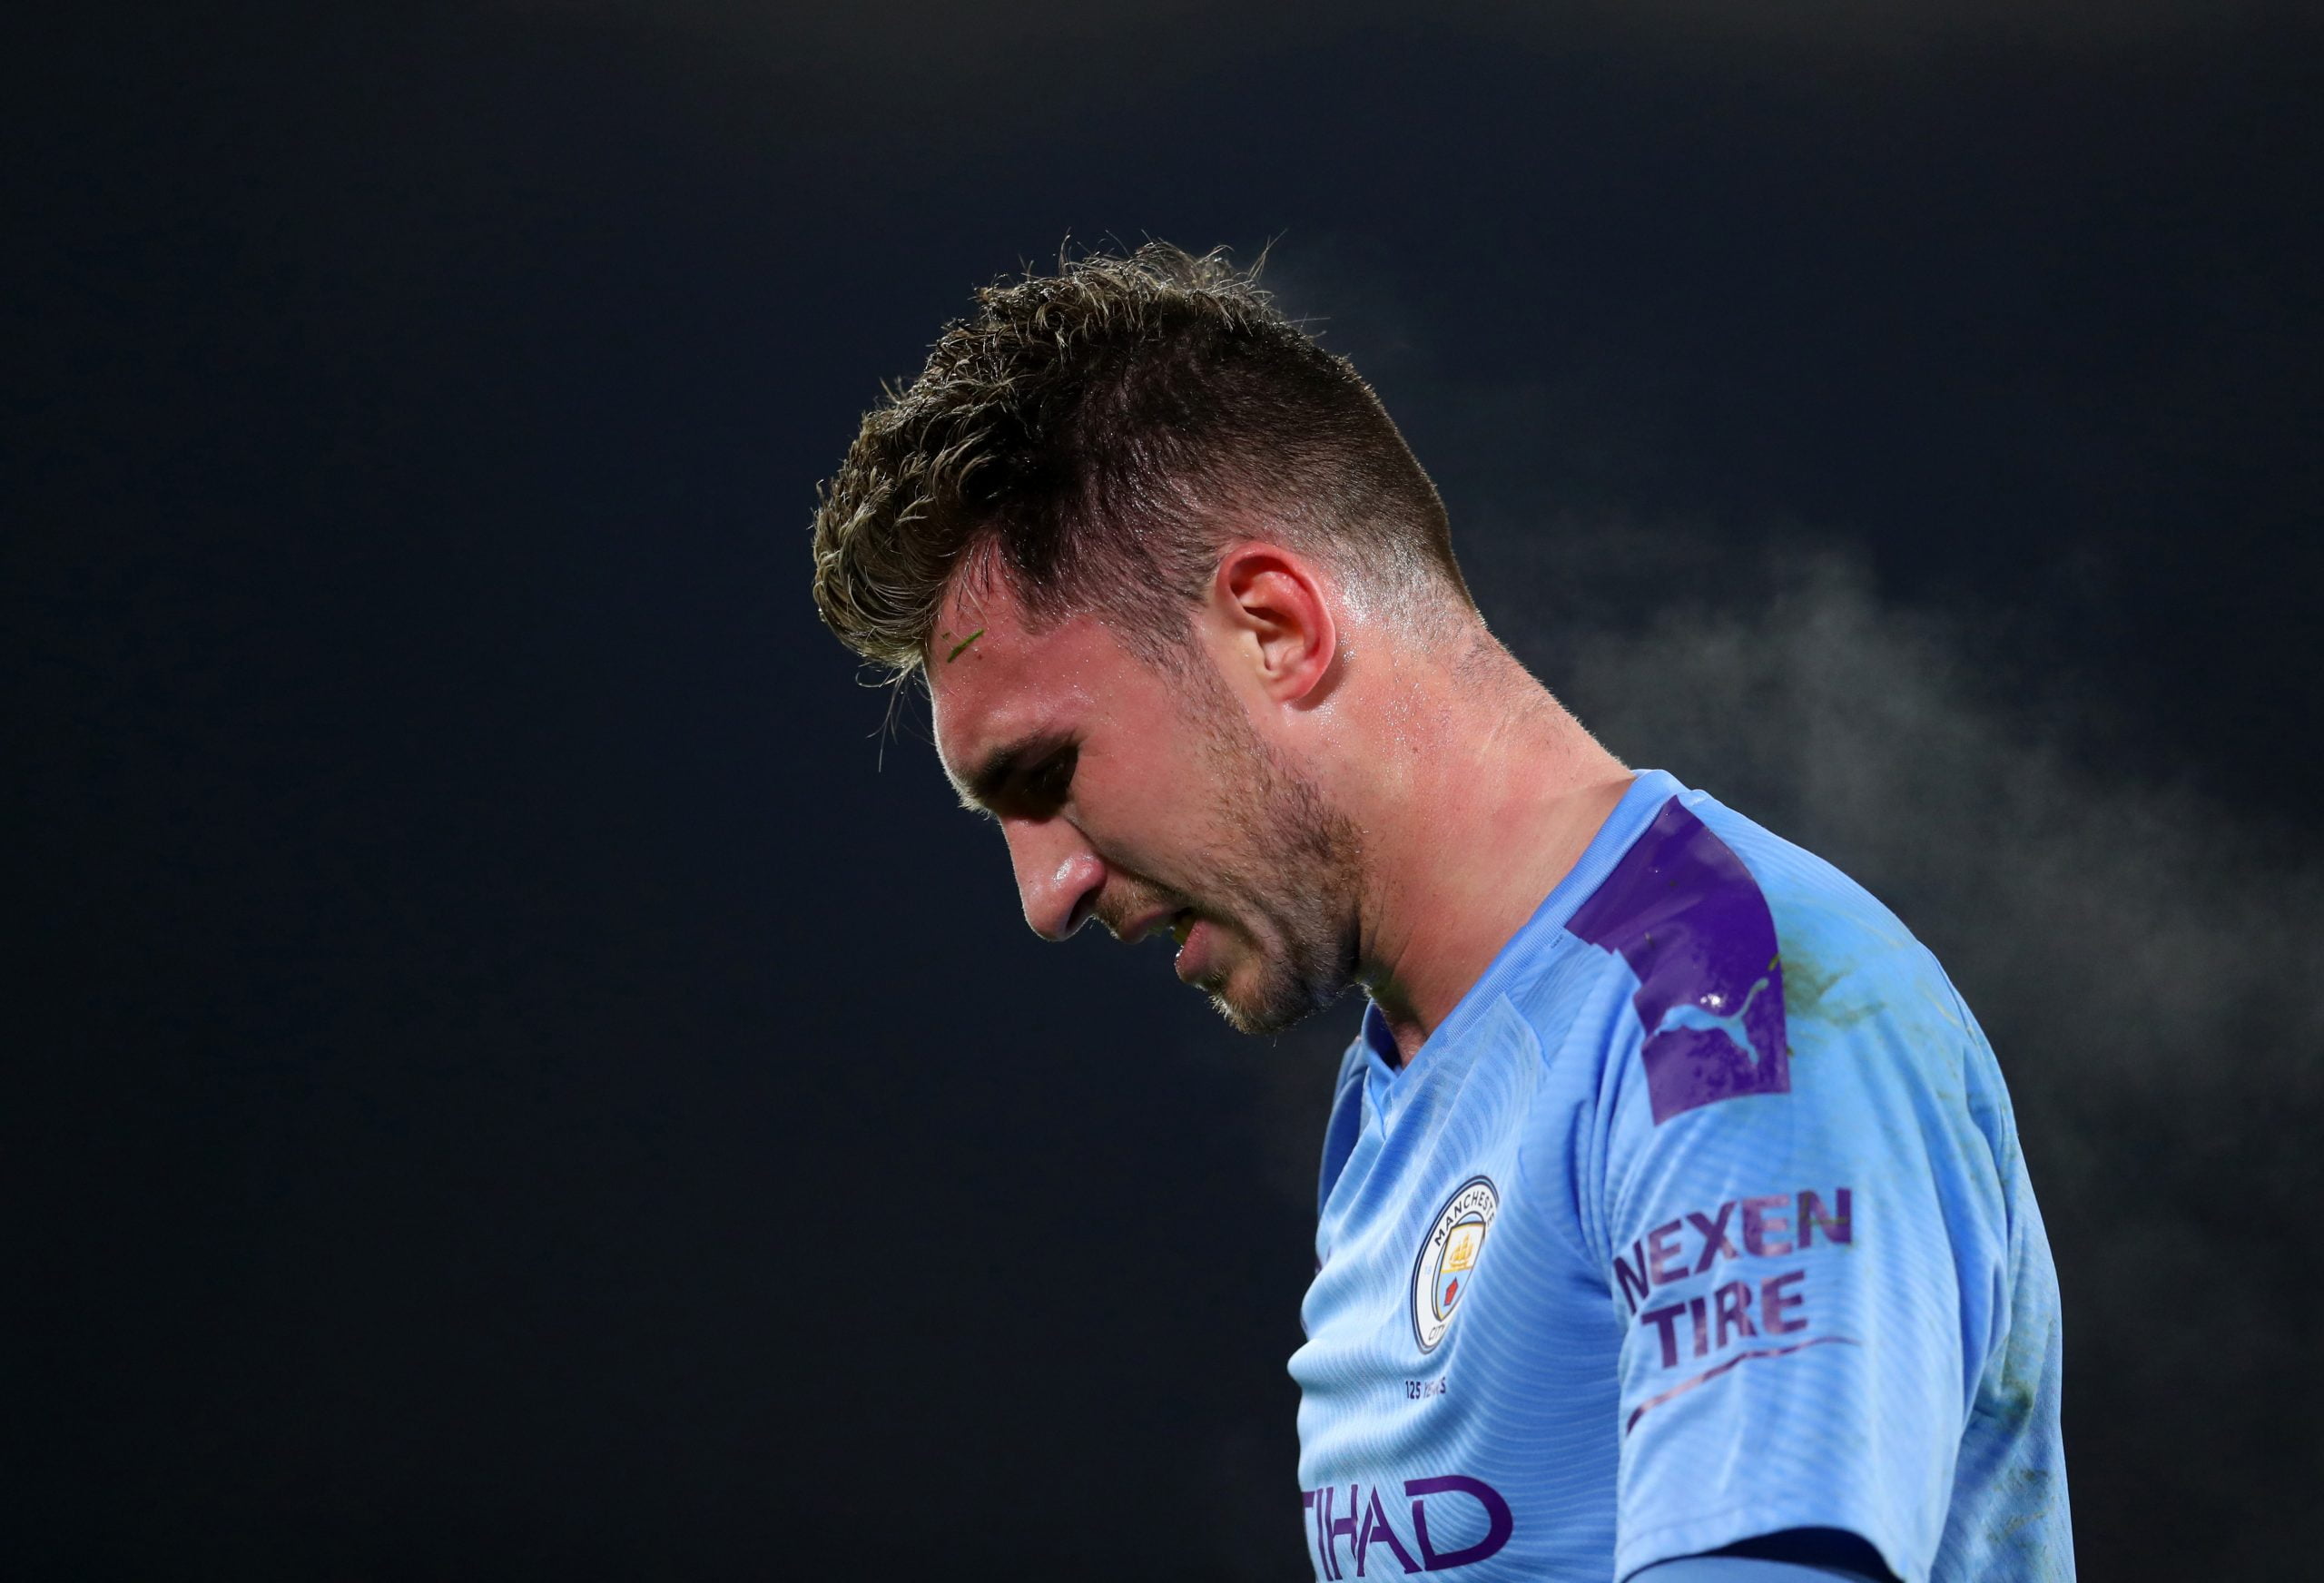 Manchester City's Laporte is on Real Madrid's radar (Laporte is seen in the picture)